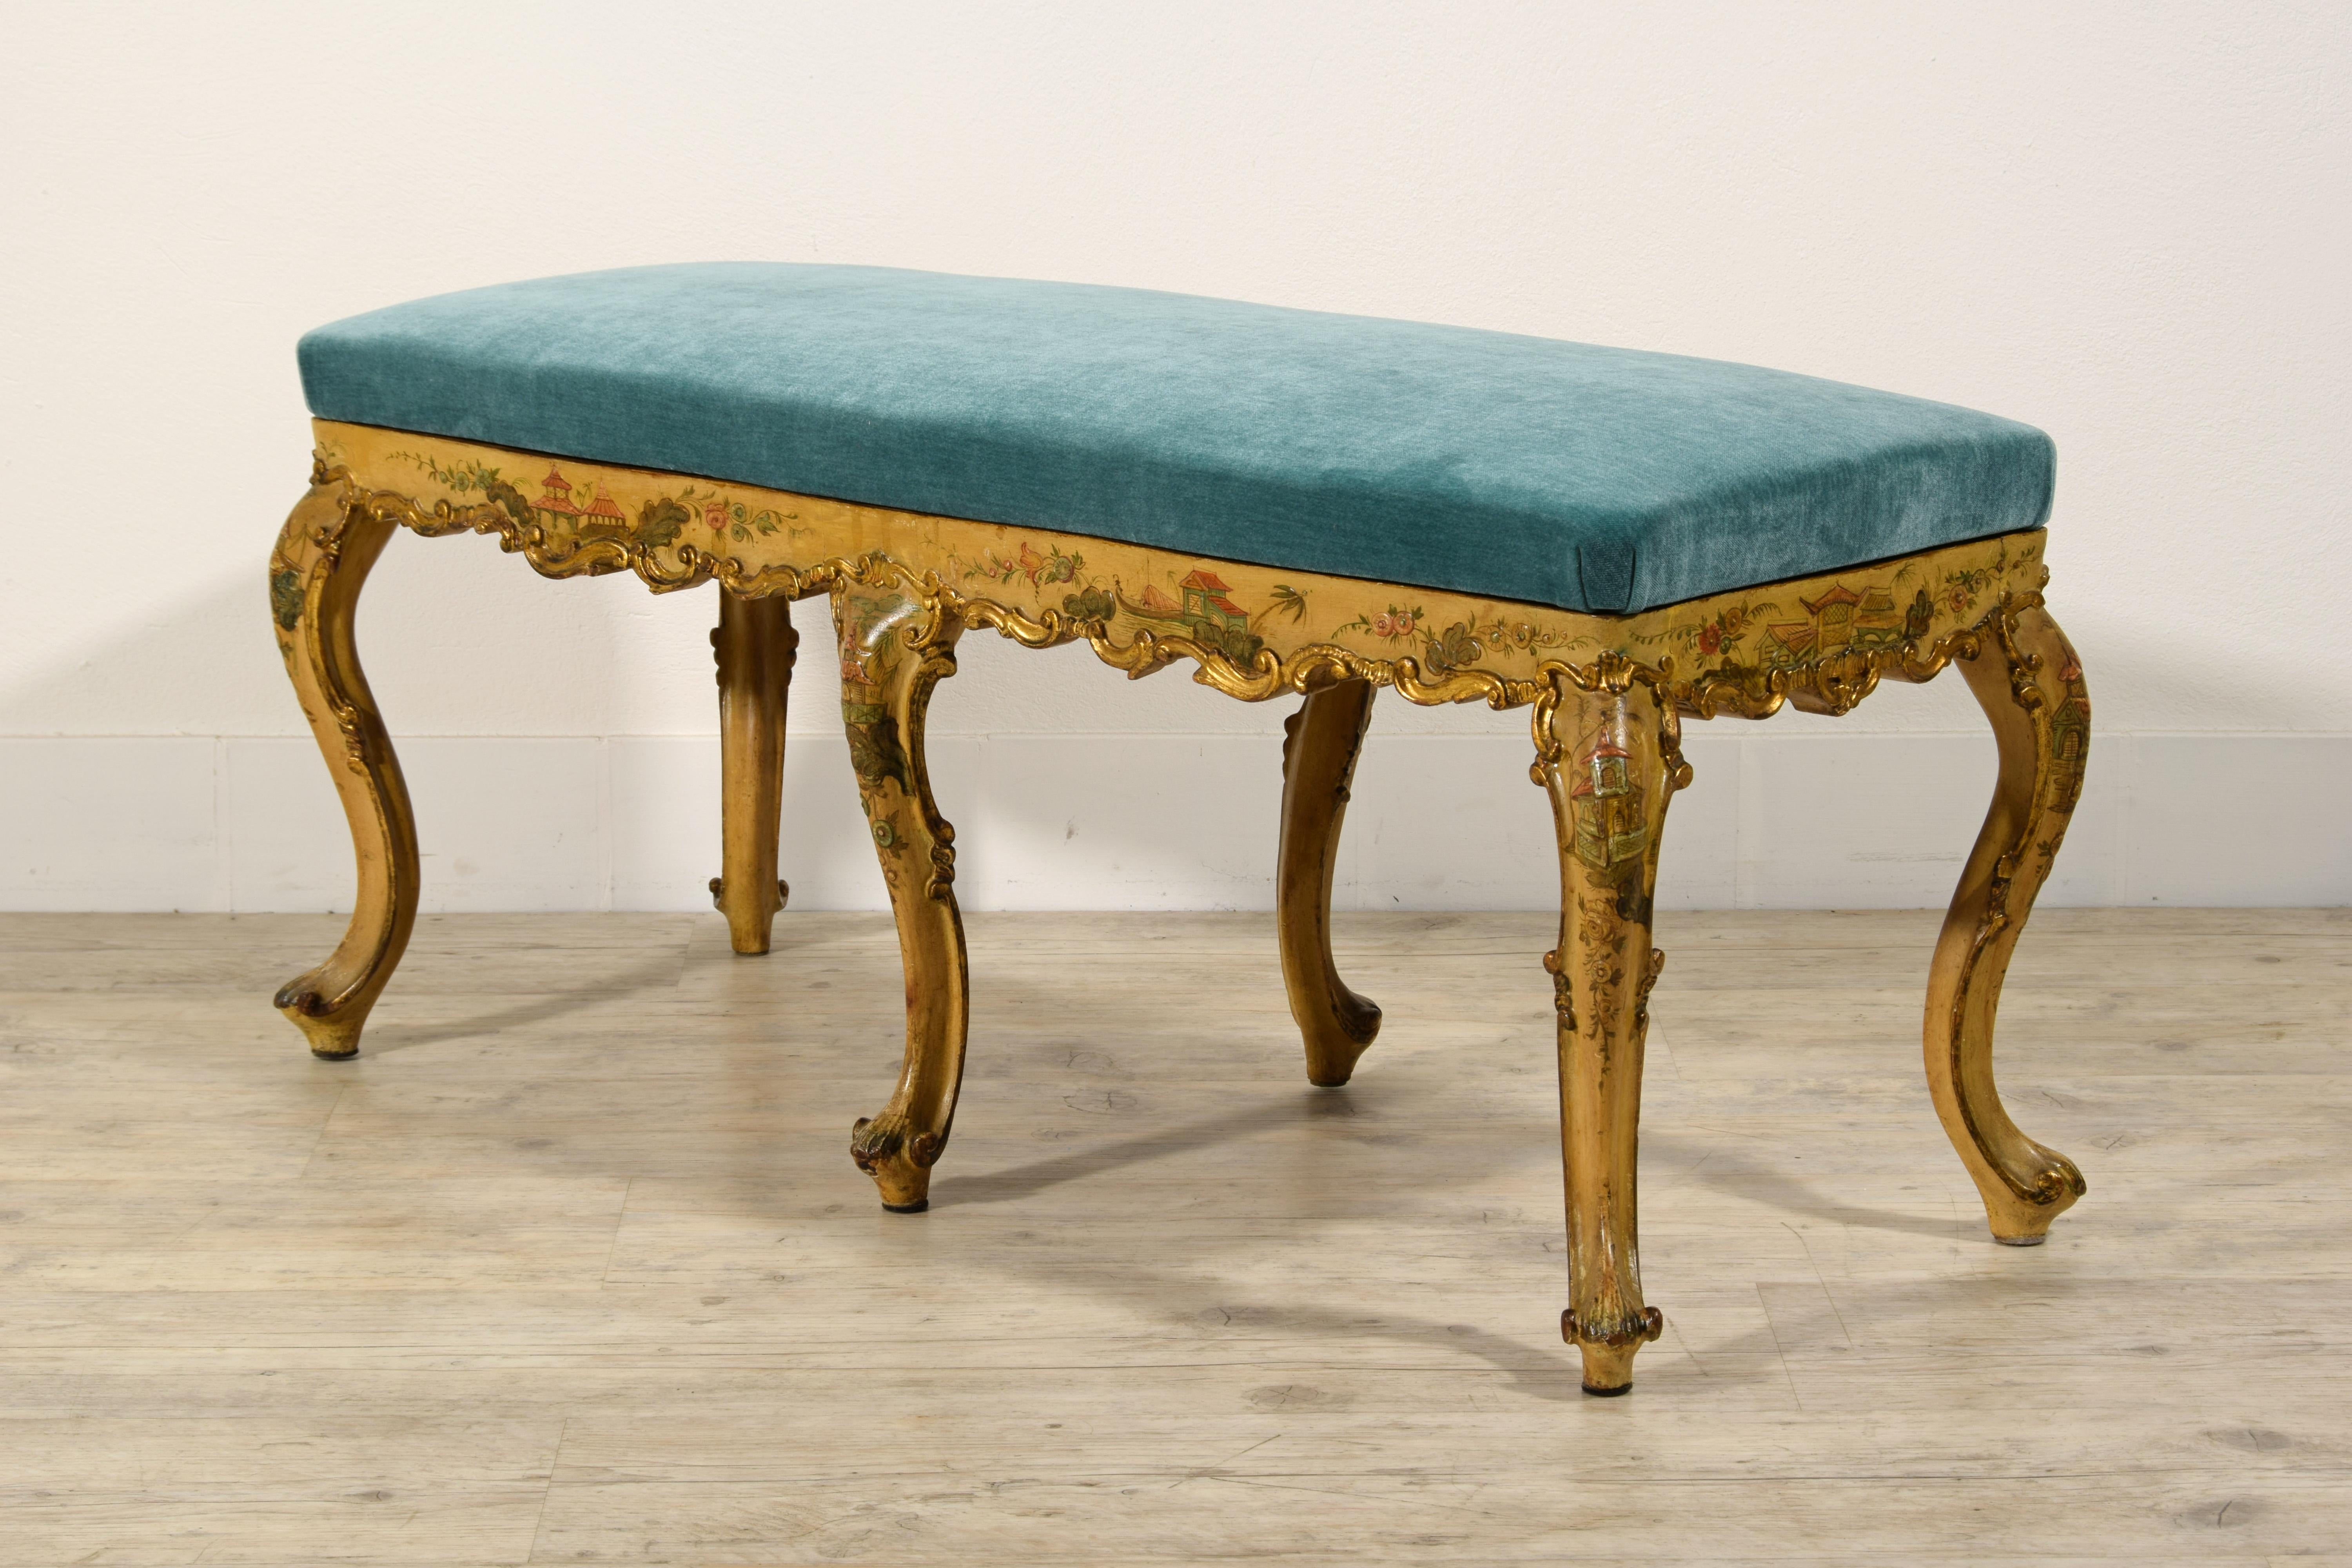 20th Century, Venetian Baroque style carved and laquered giltwood bench.

This small center bench was made in the Venetian baroque style around the early twentieth century. The structure is in carved, lacquered and gilded wood and the seat is